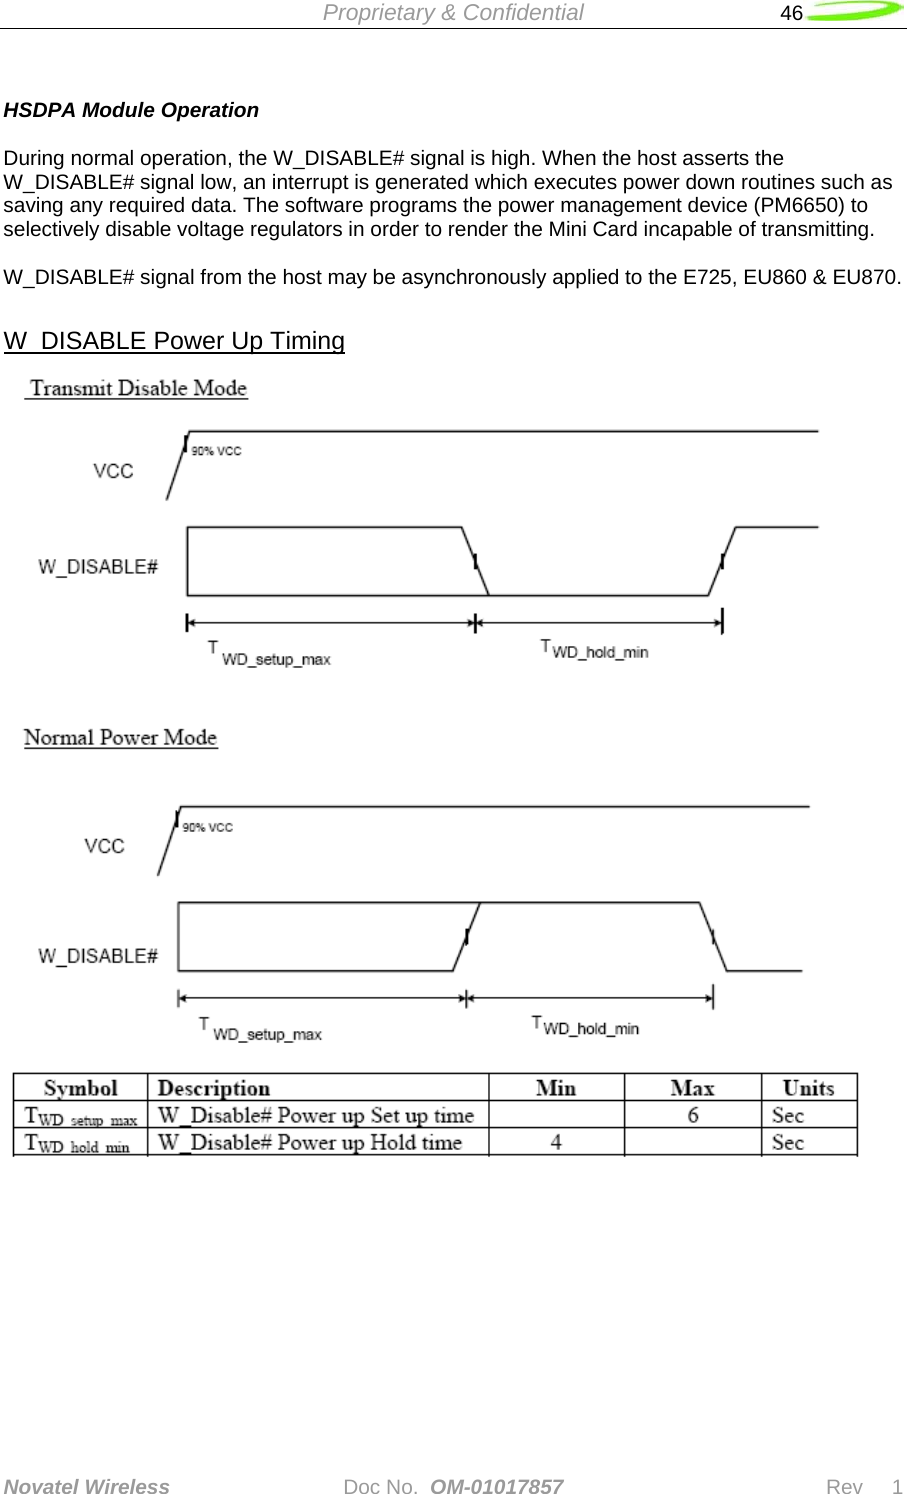  Proprietary &amp; Confidential   46   Novatel Wireless   Doc No.  OM-01017857                              Rev     1   HSDPA Module Operation   During normal operation, the W_DISABLE# signal is high. When the host asserts the W_DISABLE# signal low, an interrupt is generated which executes power down routines such as saving any required data. The software programs the power management device (PM6650) to selectively disable voltage regulators in order to render the Mini Card incapable of transmitting.   W_DISABLE# signal from the host may be asynchronously applied to the E725, EU860 &amp; EU870.  W_DISABLE Power Up Timing  